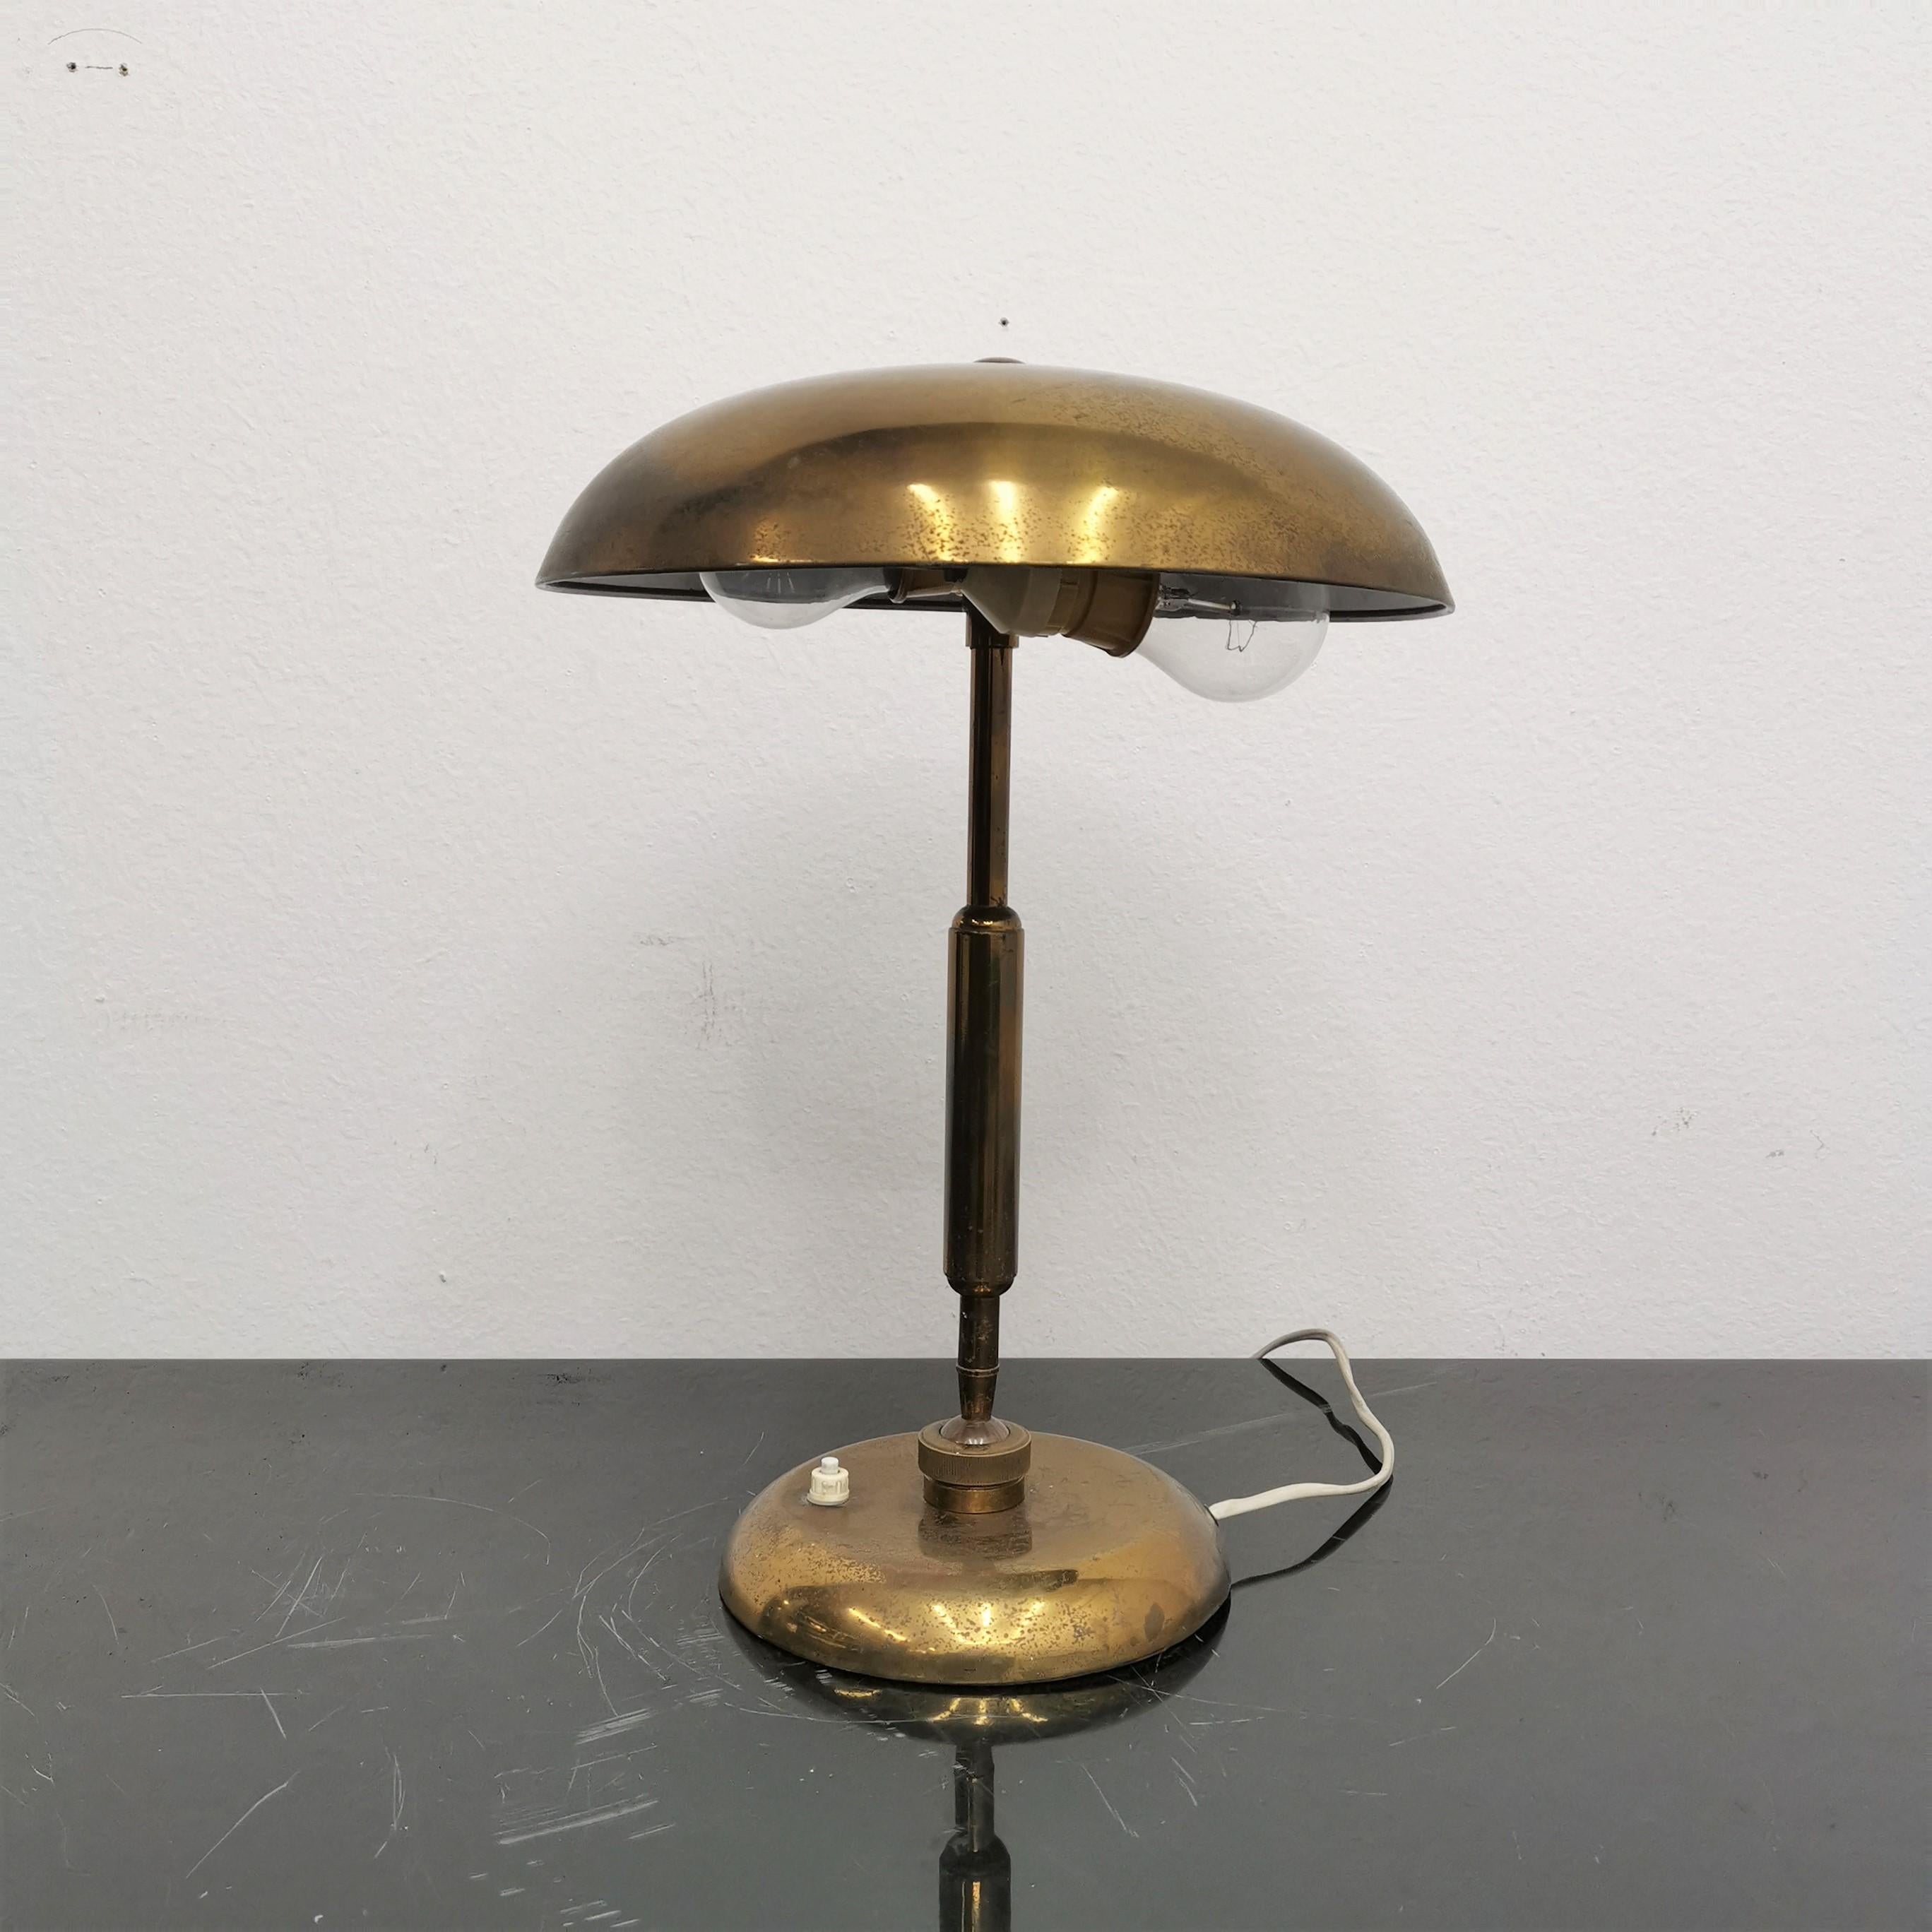 Stylish and beautiful mid-century table lamp in gilt brass, adjustable via two joints and circular lampshade. Attributed to Oscar Torlasco in Italy in the 1950s.
Wear consistent with age and use.

We have also put on sale another lamp of the same